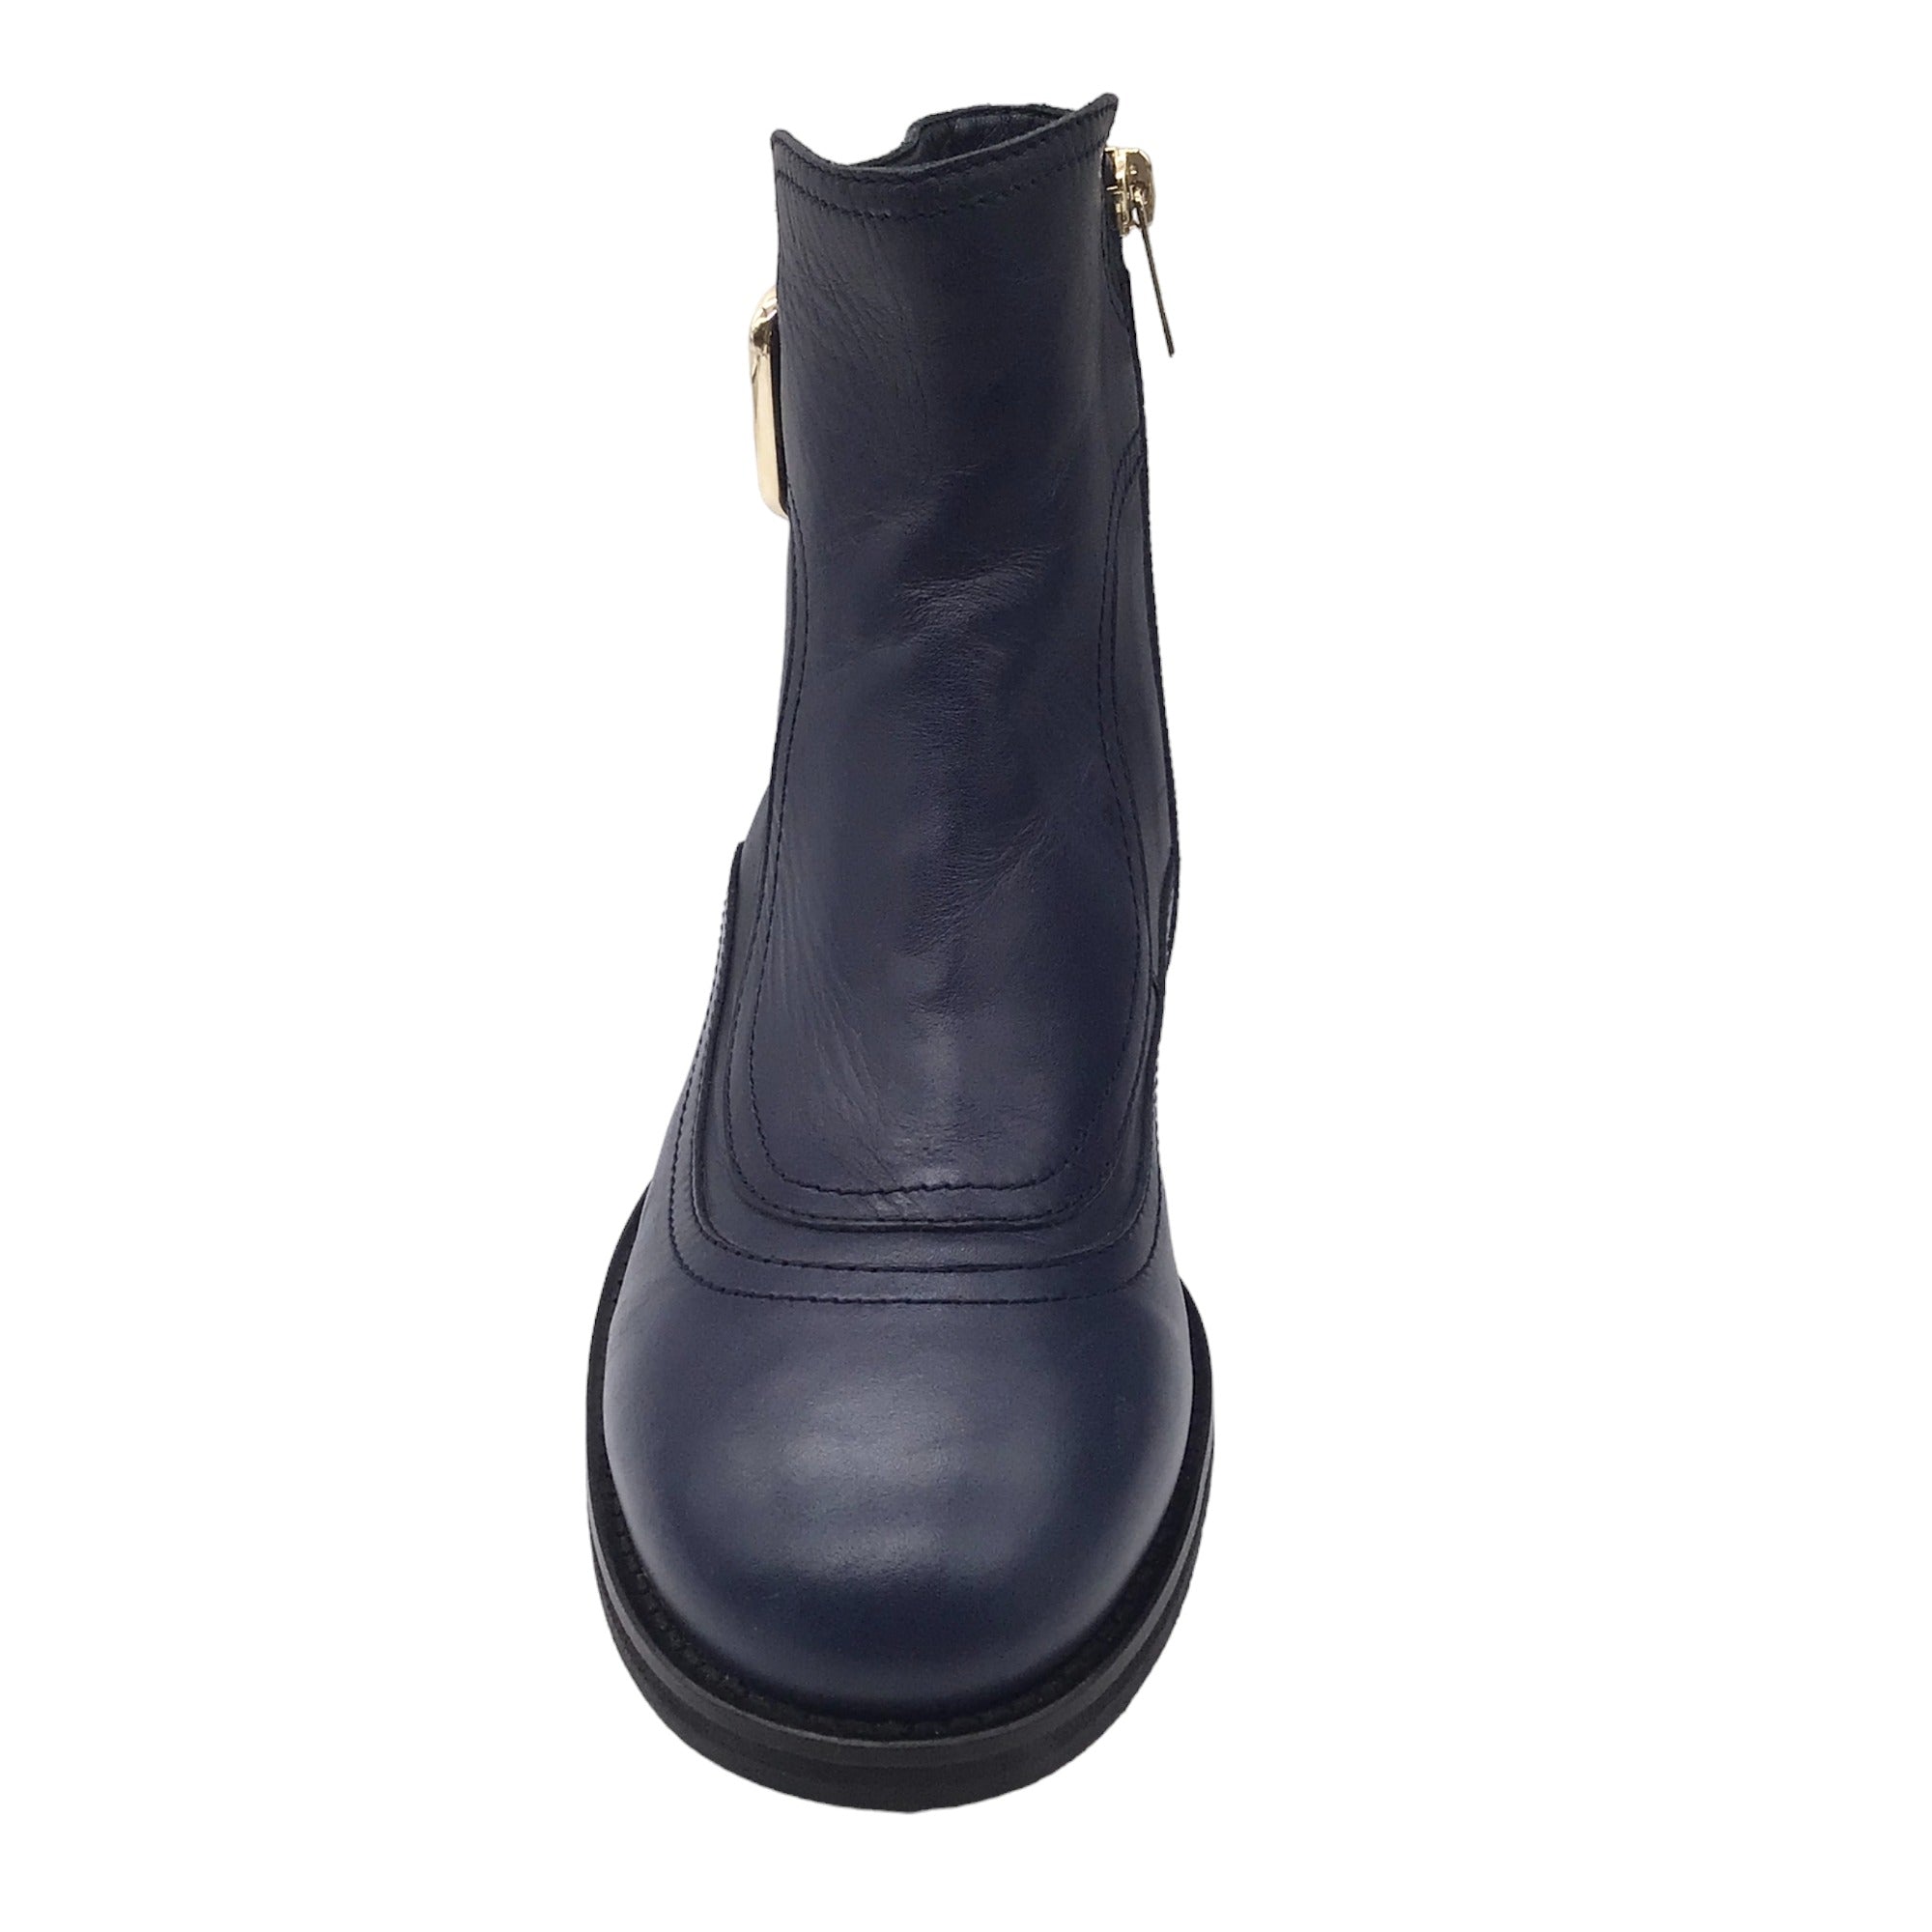 Jimmy Choo Brylee Navy Blue / Gold Buckle Flat Leather Ankle Boots